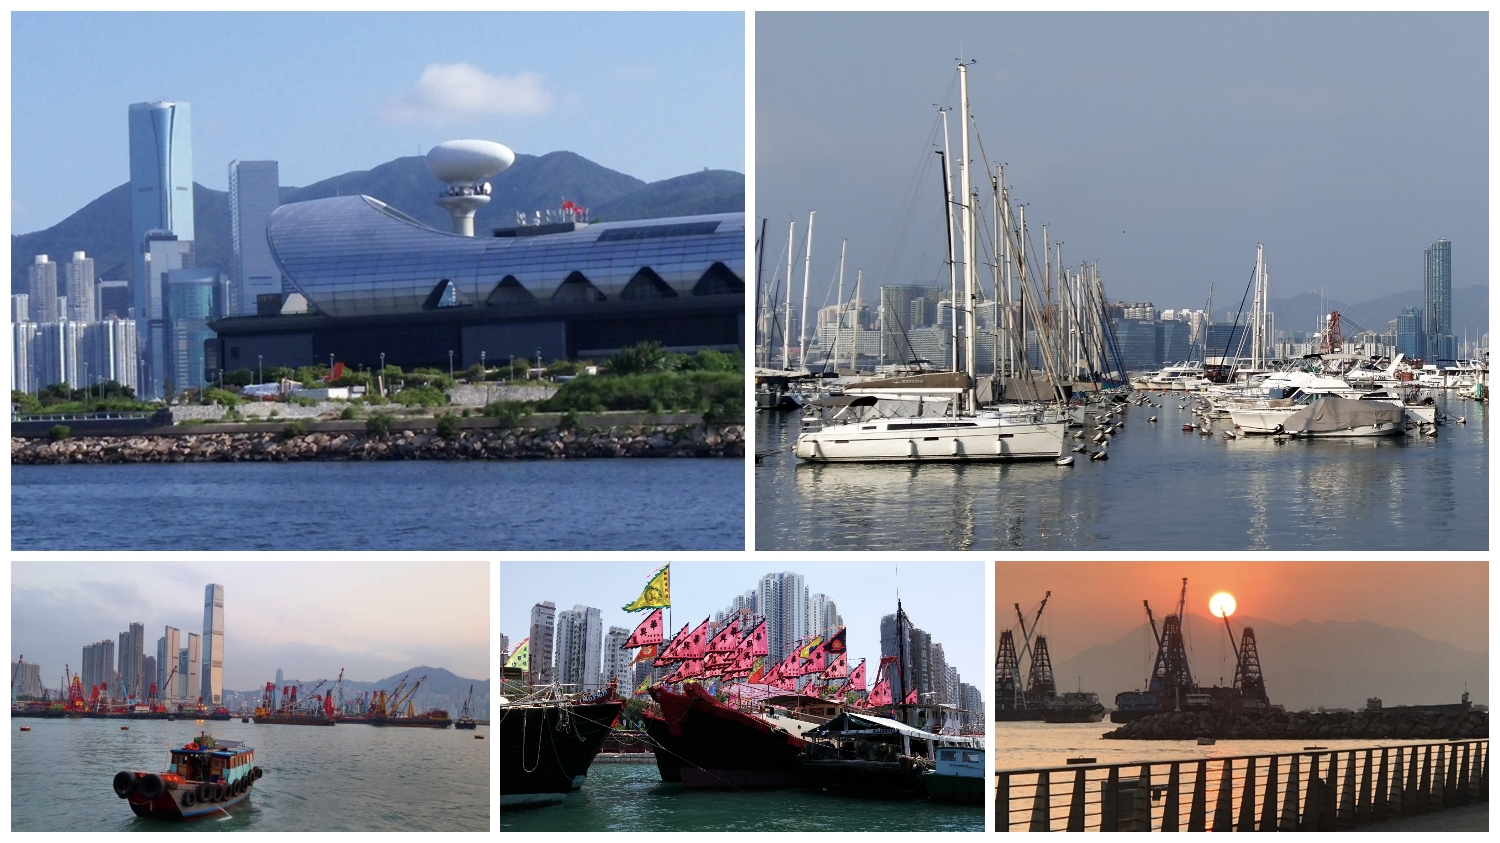 5 typhoon shelters in urban Hong Kong for travelers to TIY (tour it yourselves)